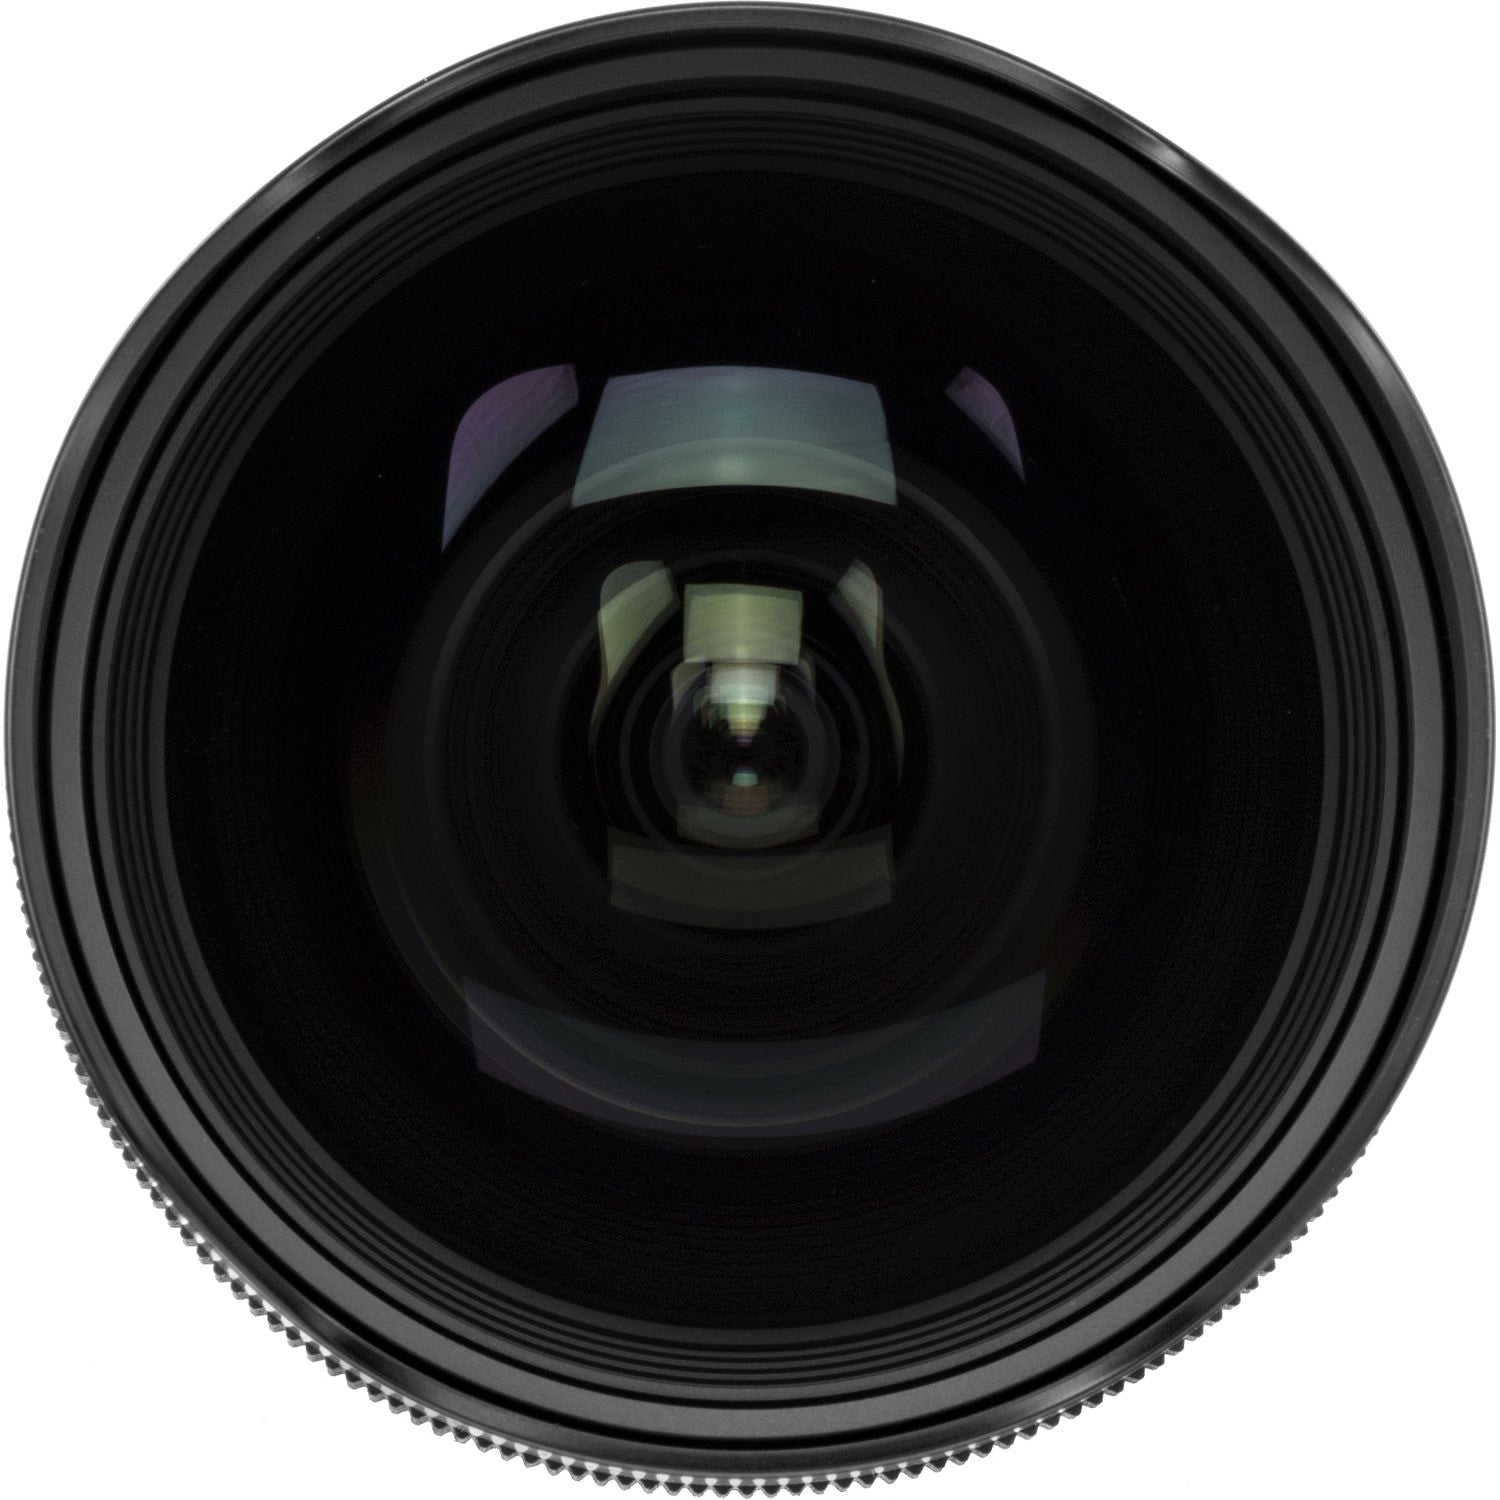 Sigma 14-24mm F2.8 DG HSM Art Lens for Nikon F in a Front Close-Up View